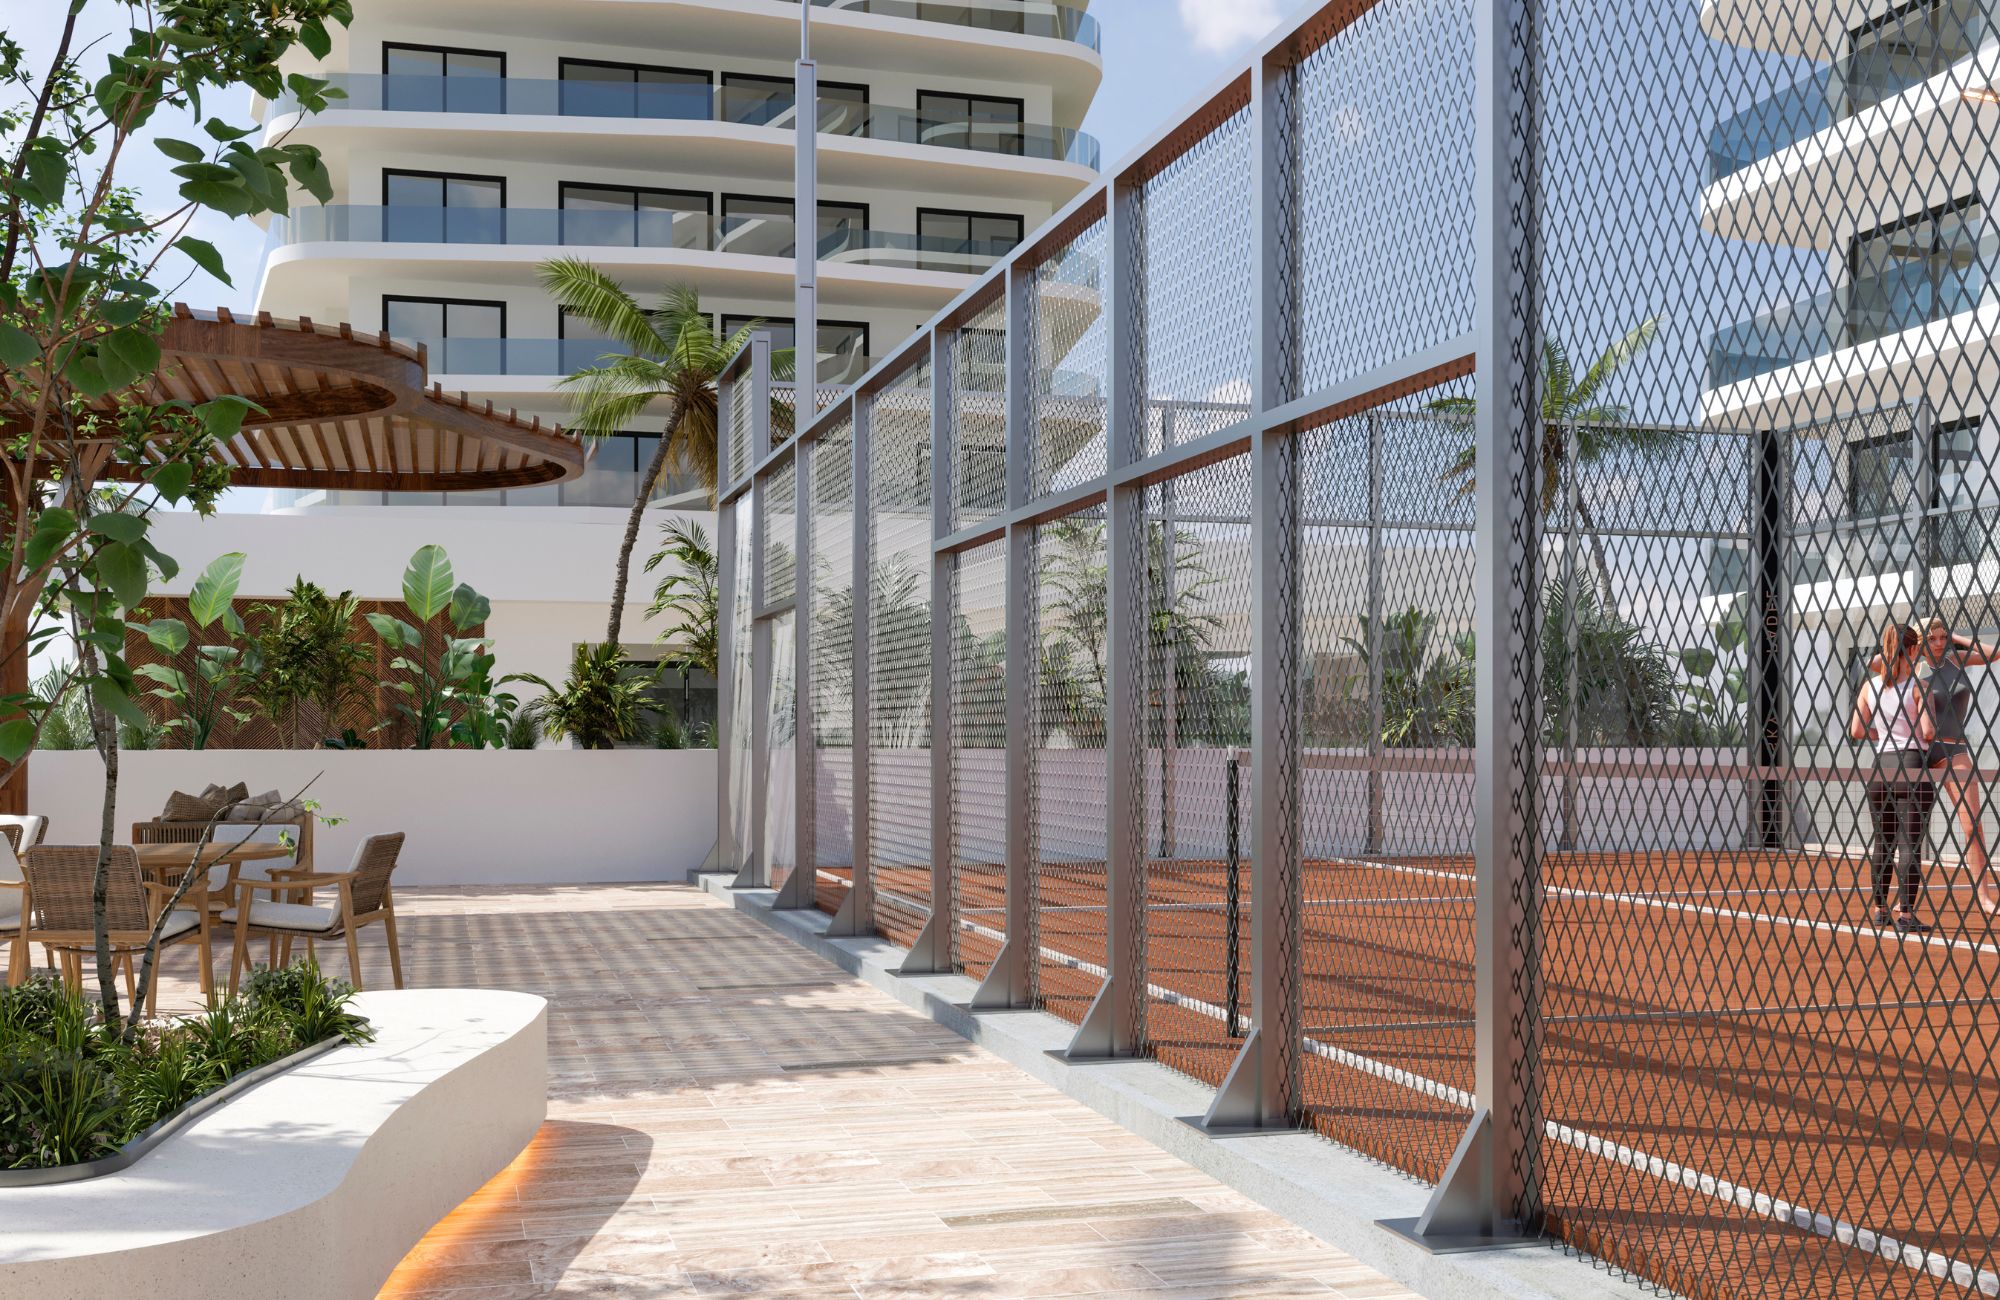 Condo with panoramic view, infinity pool, jacuzzi, snack bar, pre-construction, in Puerto Cancun